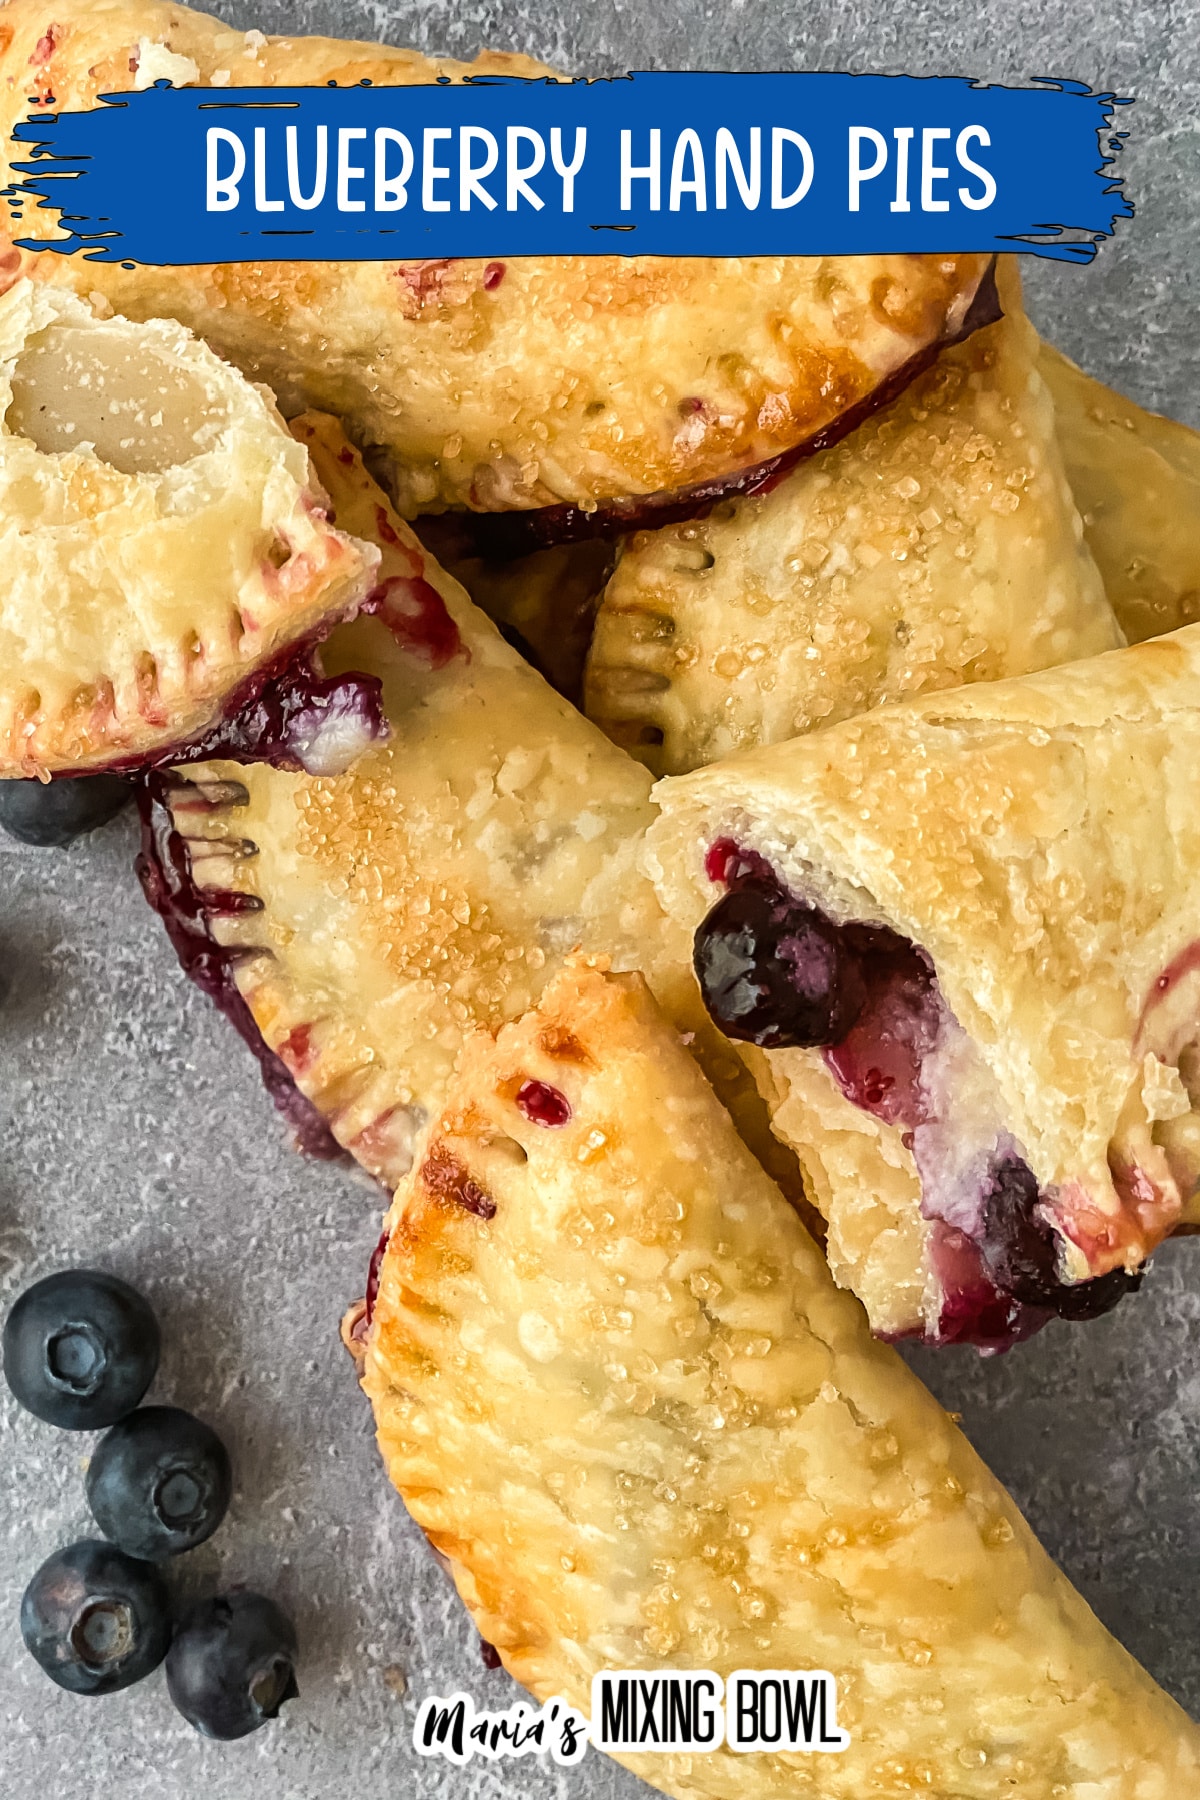 beluberry hand pies stacked on a dark background with the name in blue for pinterst